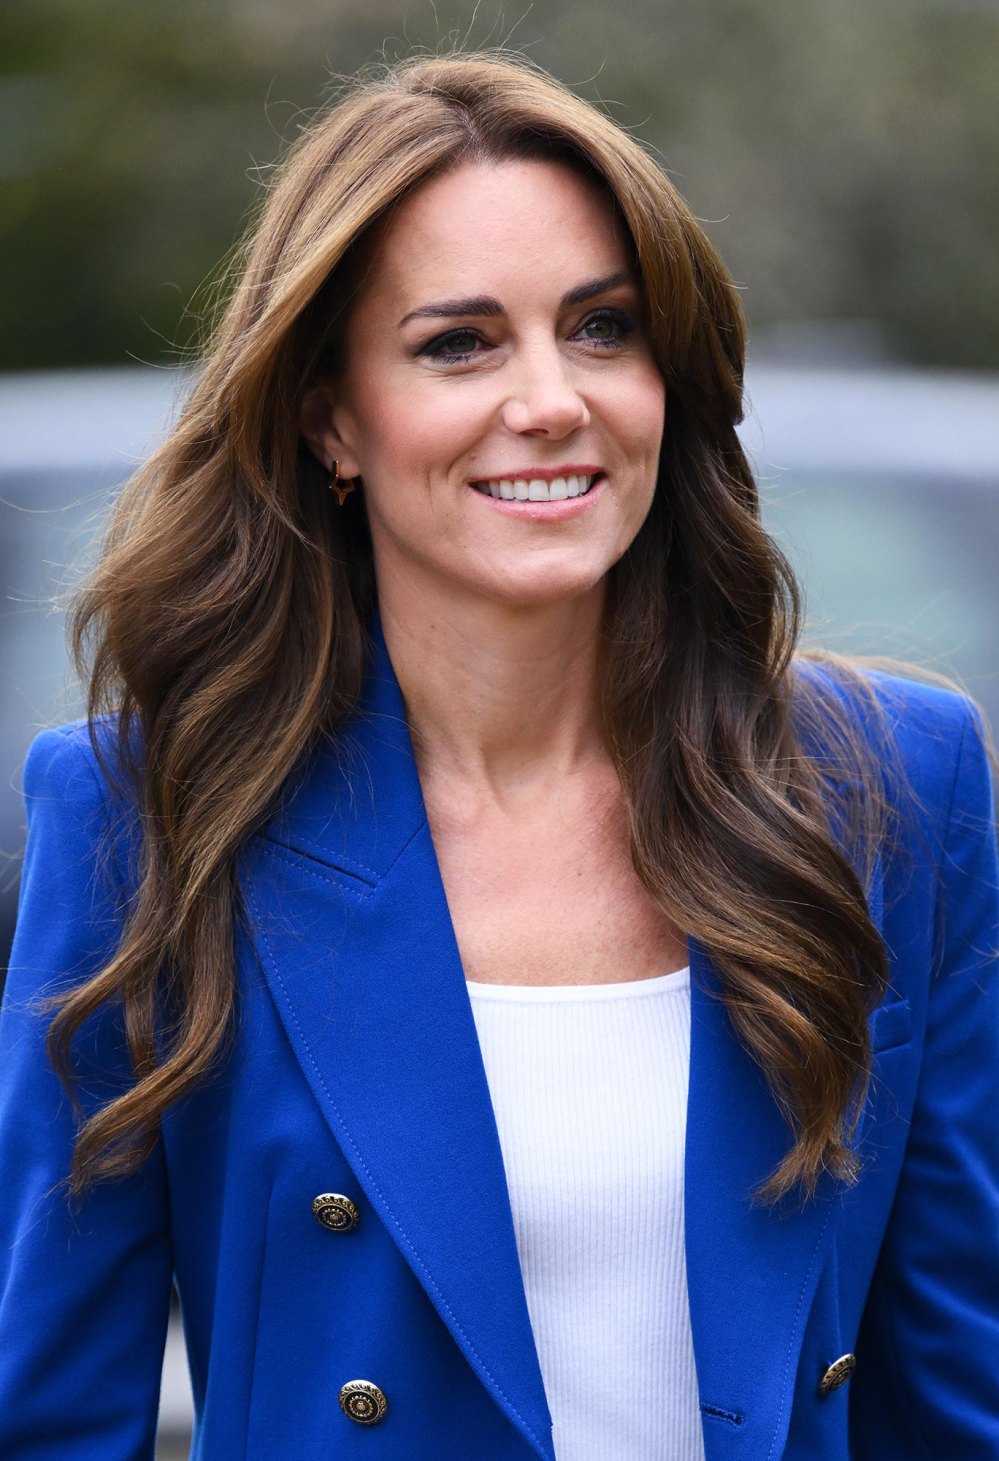 Richards Simmons Asks Fans To Pray for the Beautiful and Wonderful Kate Middleton